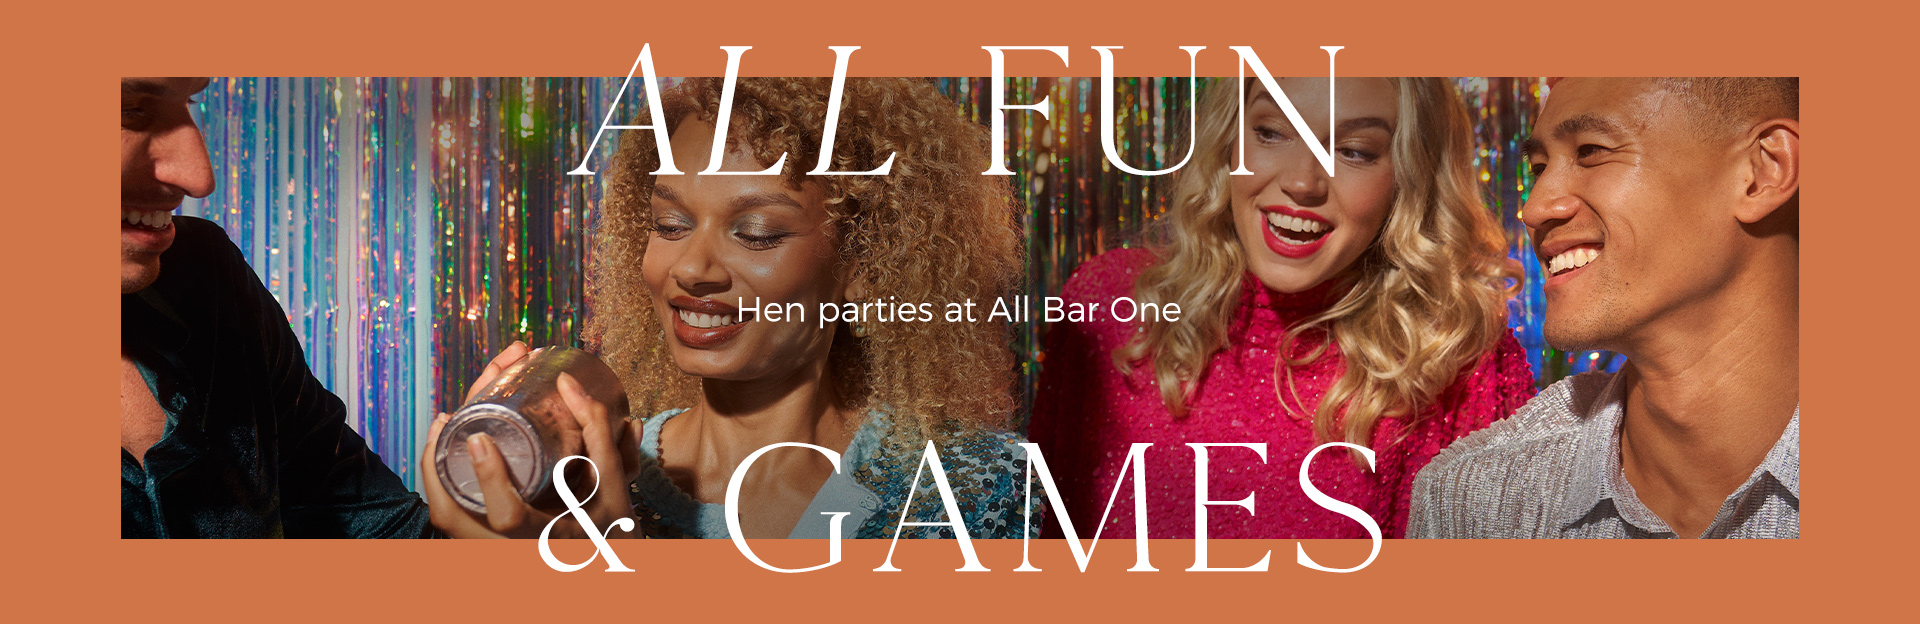 Hen parties at All Bar One Victoria